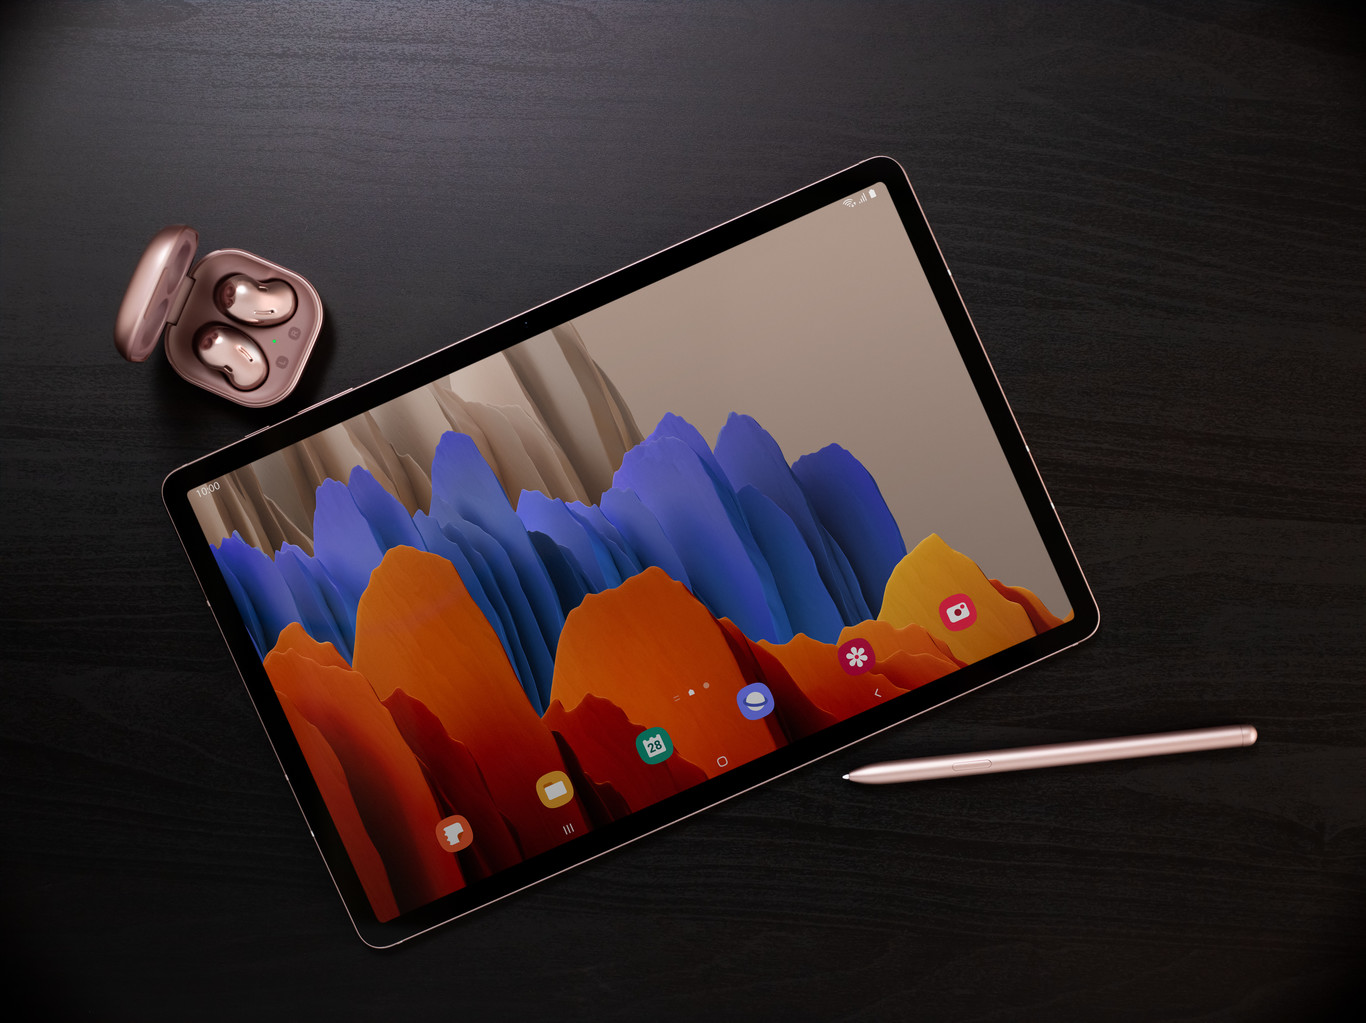 Samsung Galaxy Tab S7 and Tab S7 + hit the high end of tablets twice with 5G and 120 Hz panels